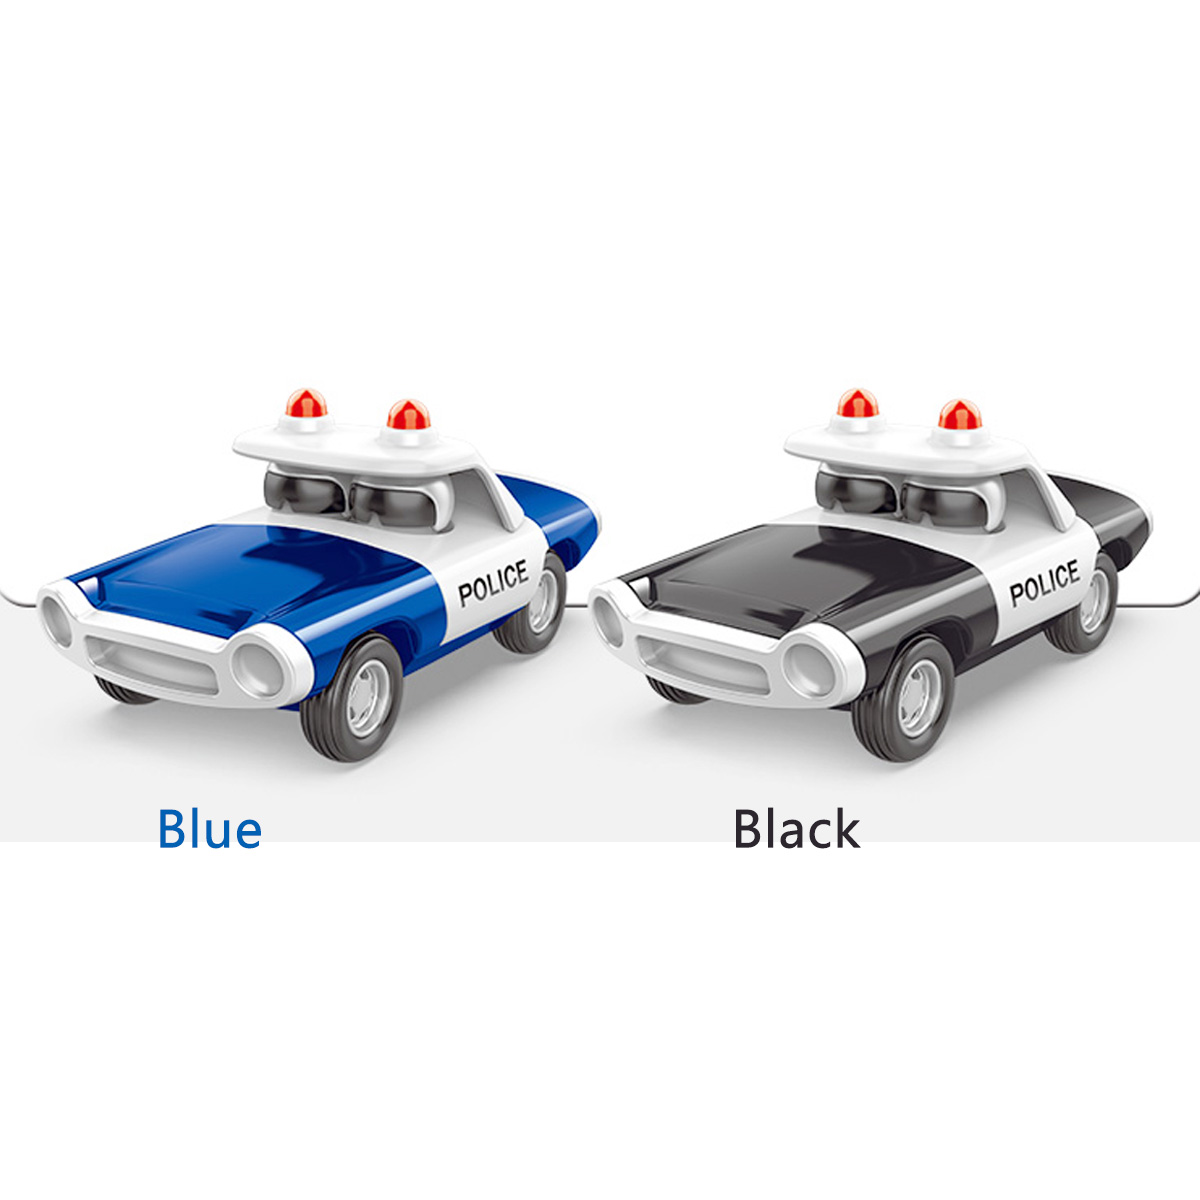 Alloy-Police-Pull-Back-Diecast-Car-Model-Toy-for-Gift-Collection-Home-Decoration-1734360-2